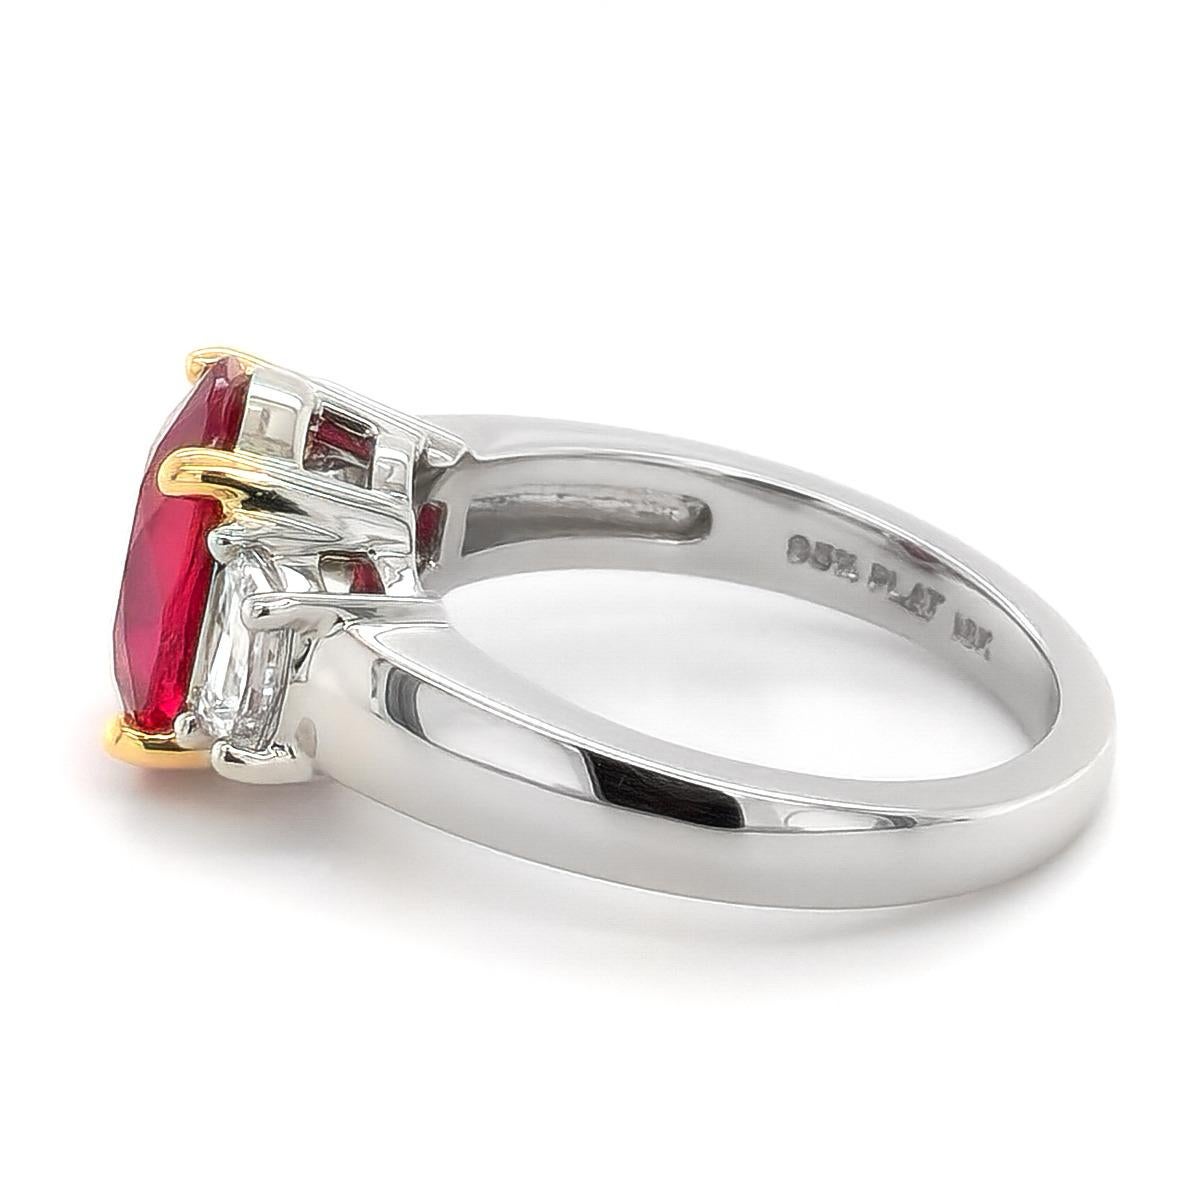 Brilliant Cut GIA and GRS Certified 3.10 Carat Unheated Ruby Diamond Platinum Ring for Women For Sale